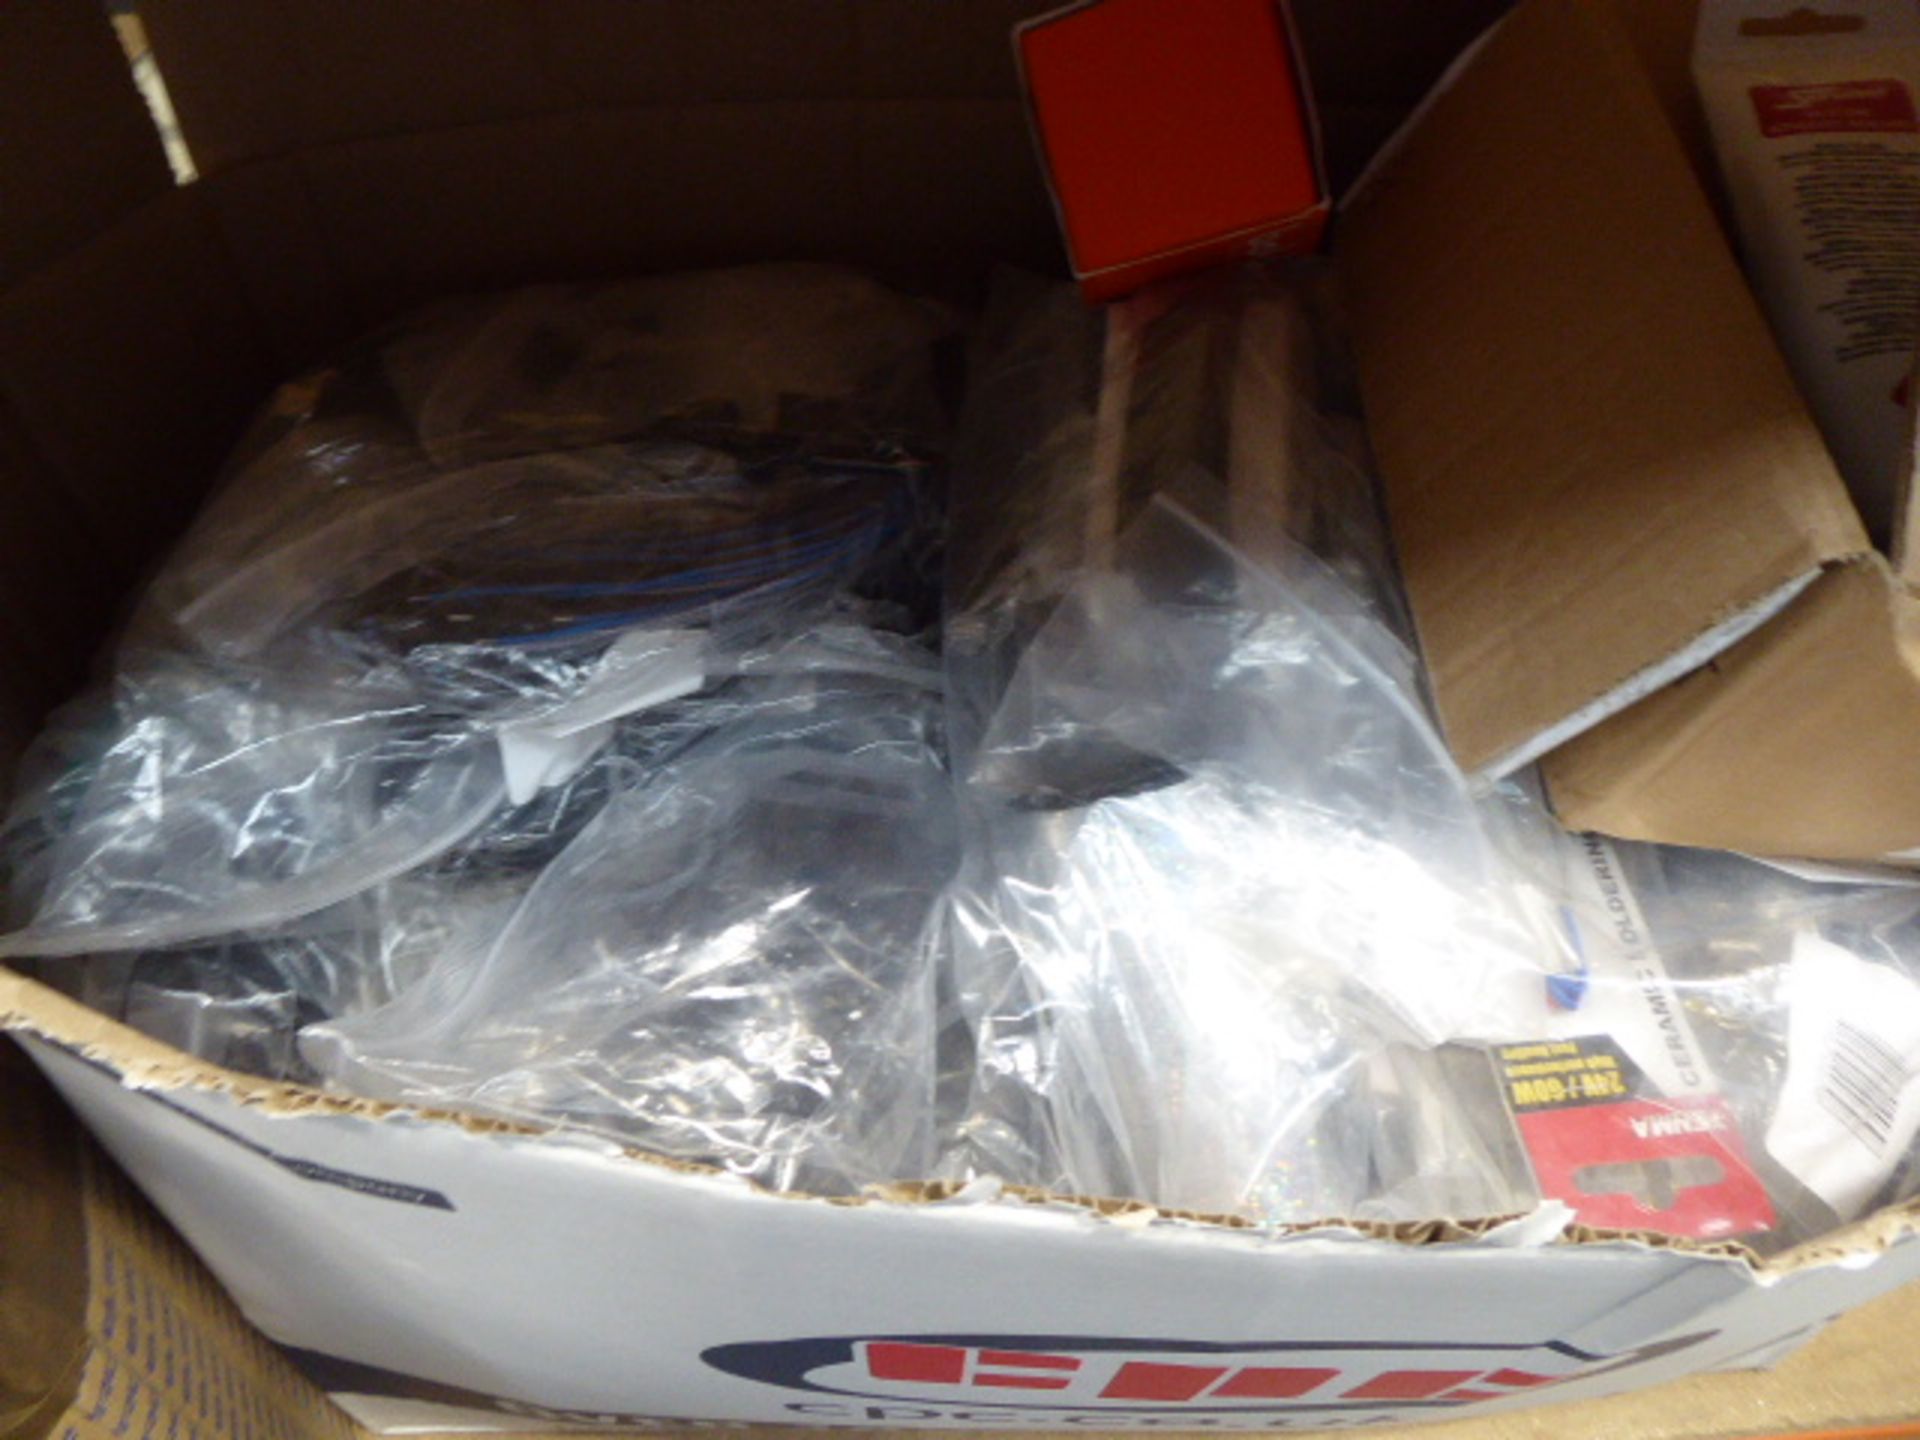 Box containing: cables, connectors, switch boxes and some silicon adhesive sealant